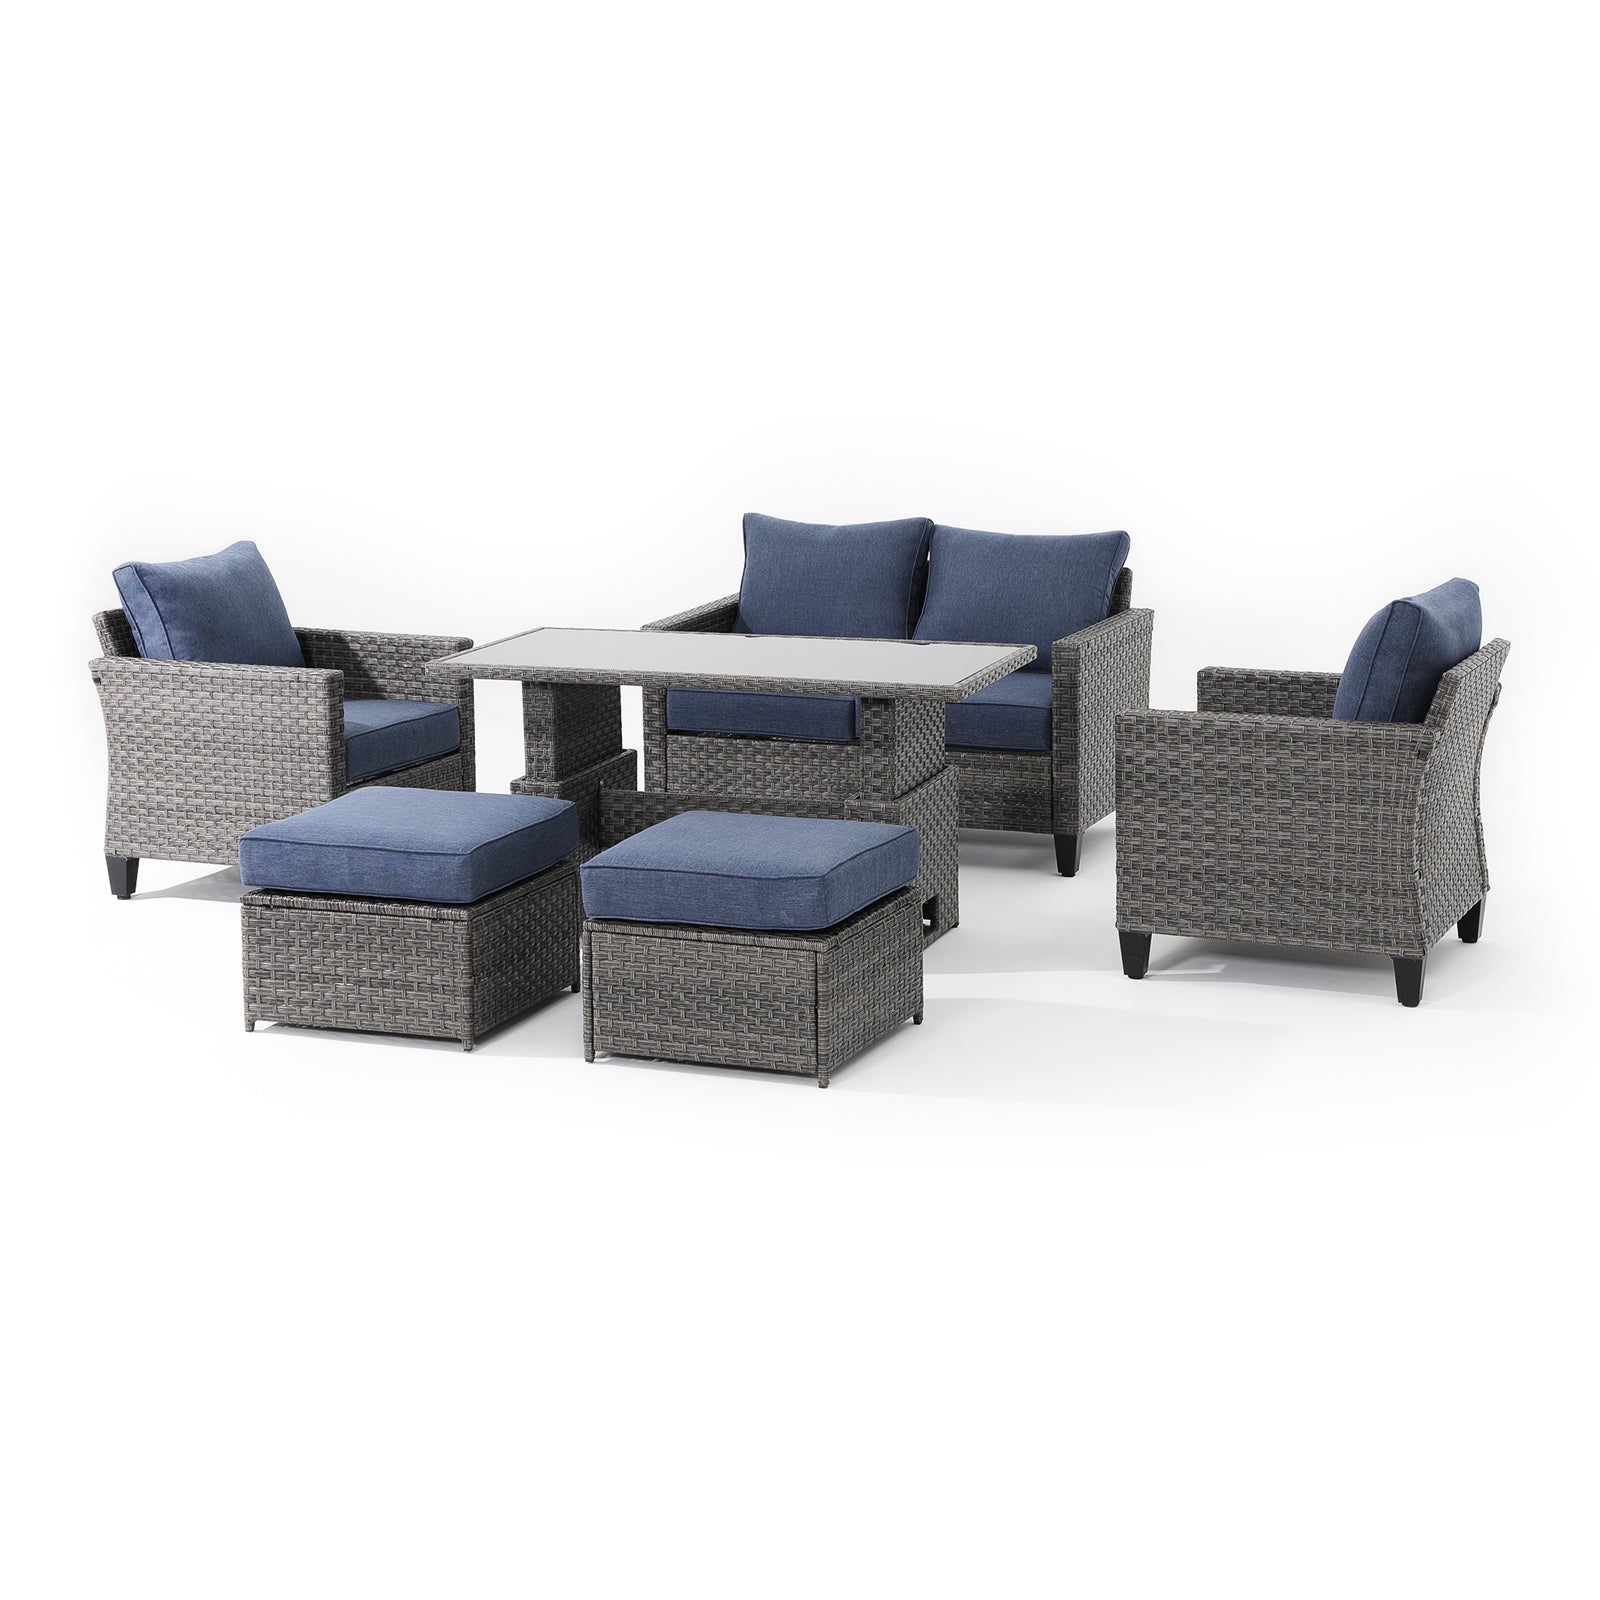 Ayia 6 piece outdoor seating set,wicker design, blue cushions-Jardina furniture #color_Navy blue#piece_6-pc. with Ottomans